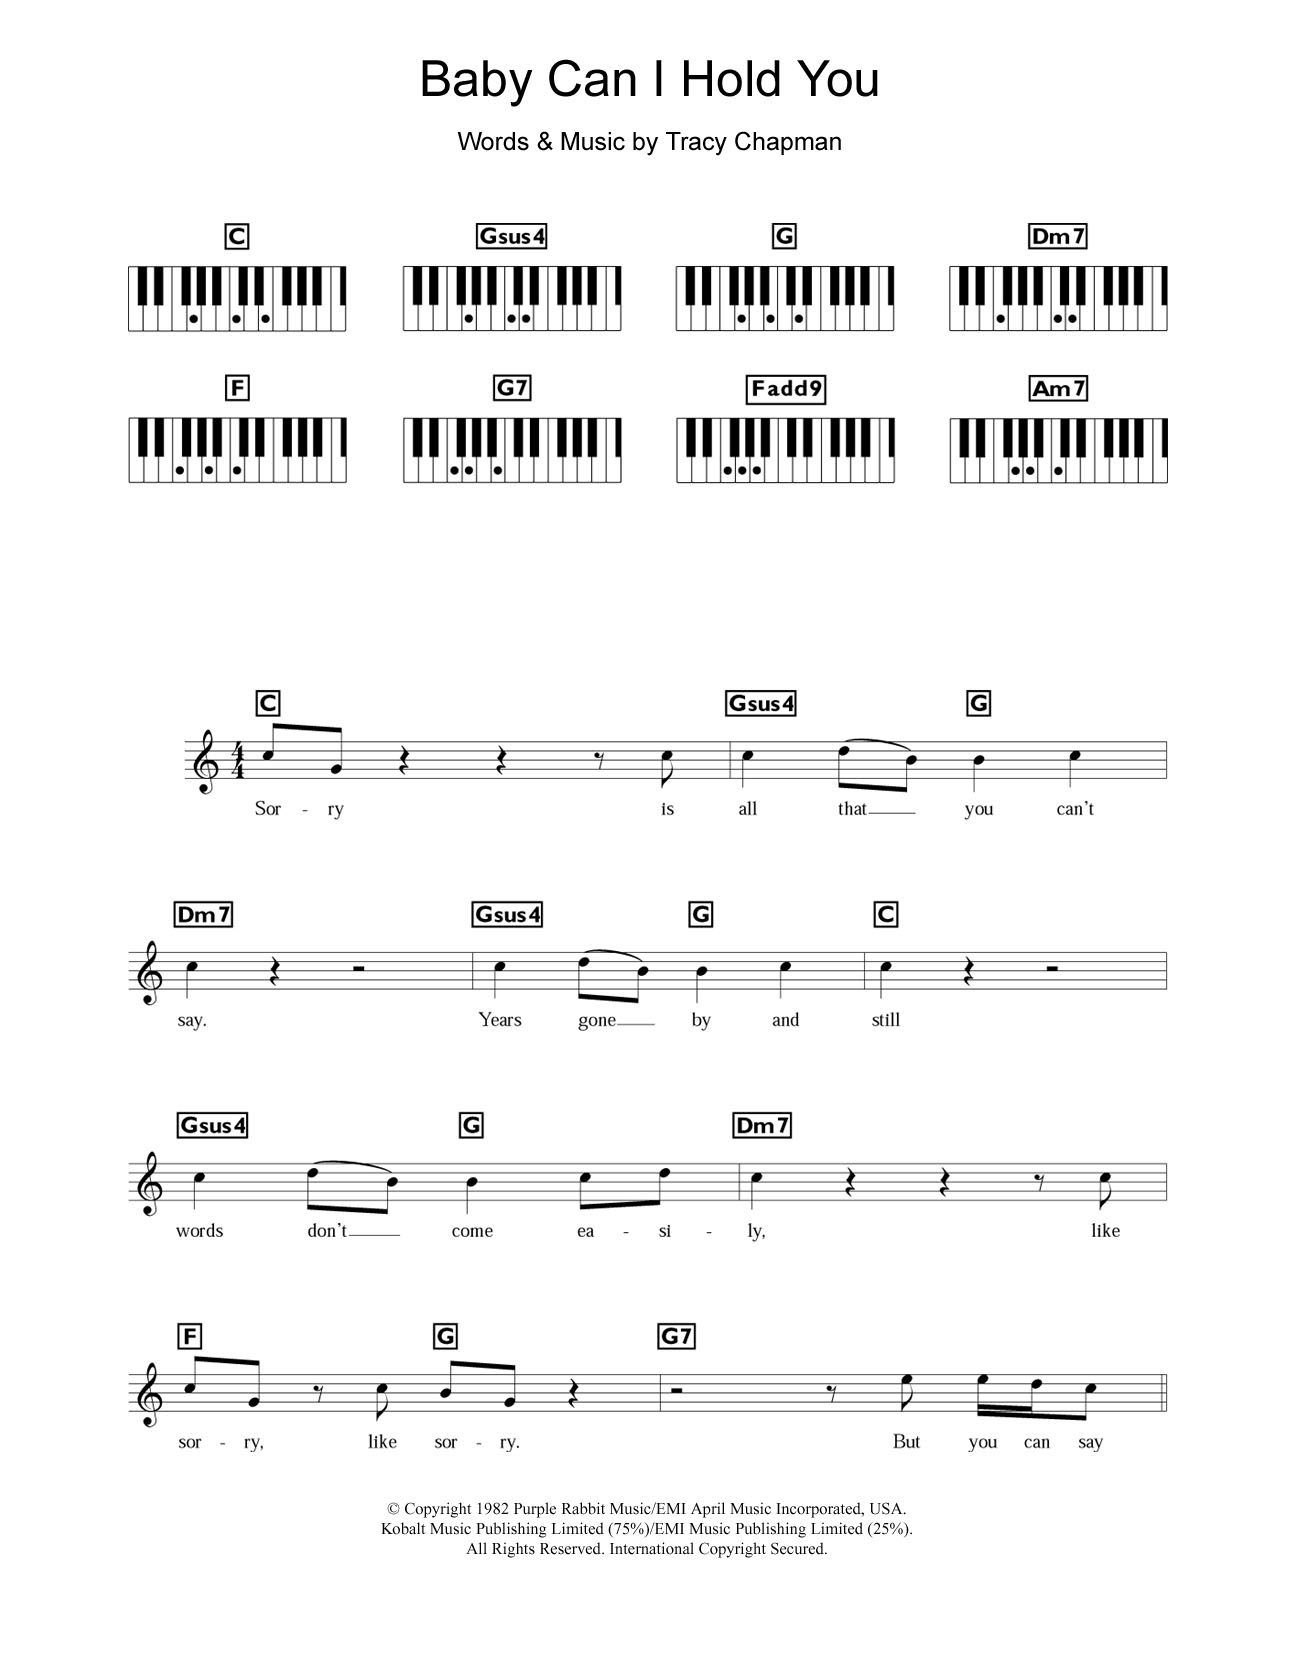 Download Boyzone Baby Can I Hold You Sheet Music